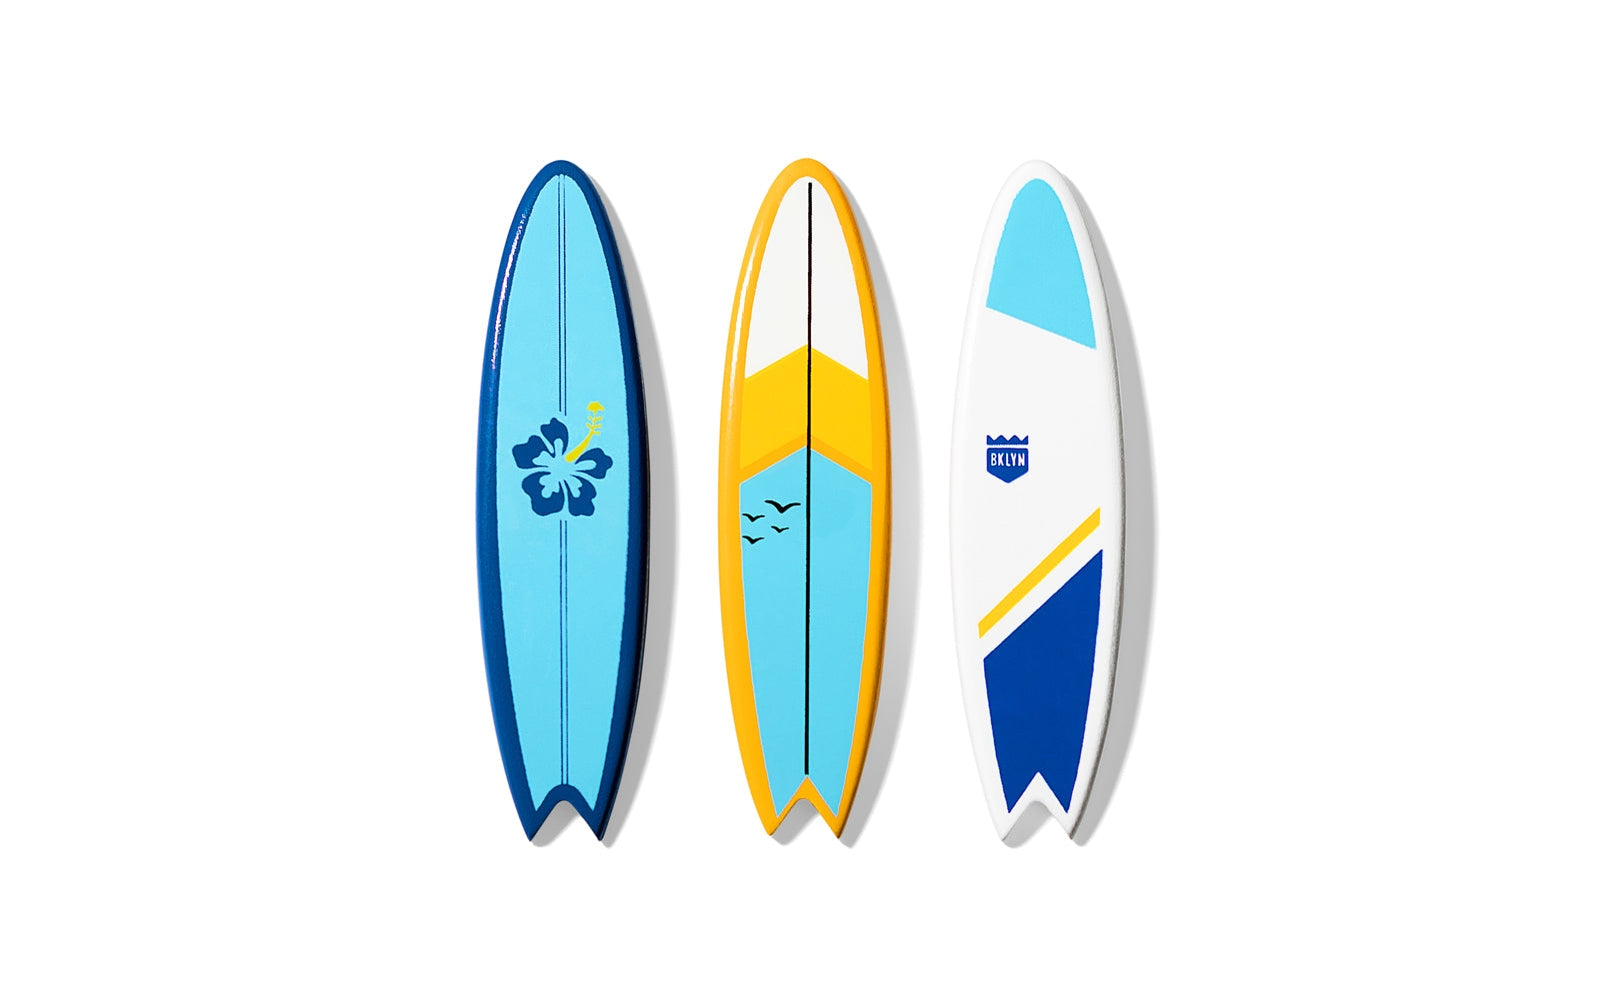 Accessories for your Candylab cars! Grab this pack of 3 unique surfboards, each with an embedded magnet. Throw one on your Big Sur, Woodie, or refrigerator. Made sustainably, made to last, made for fun.